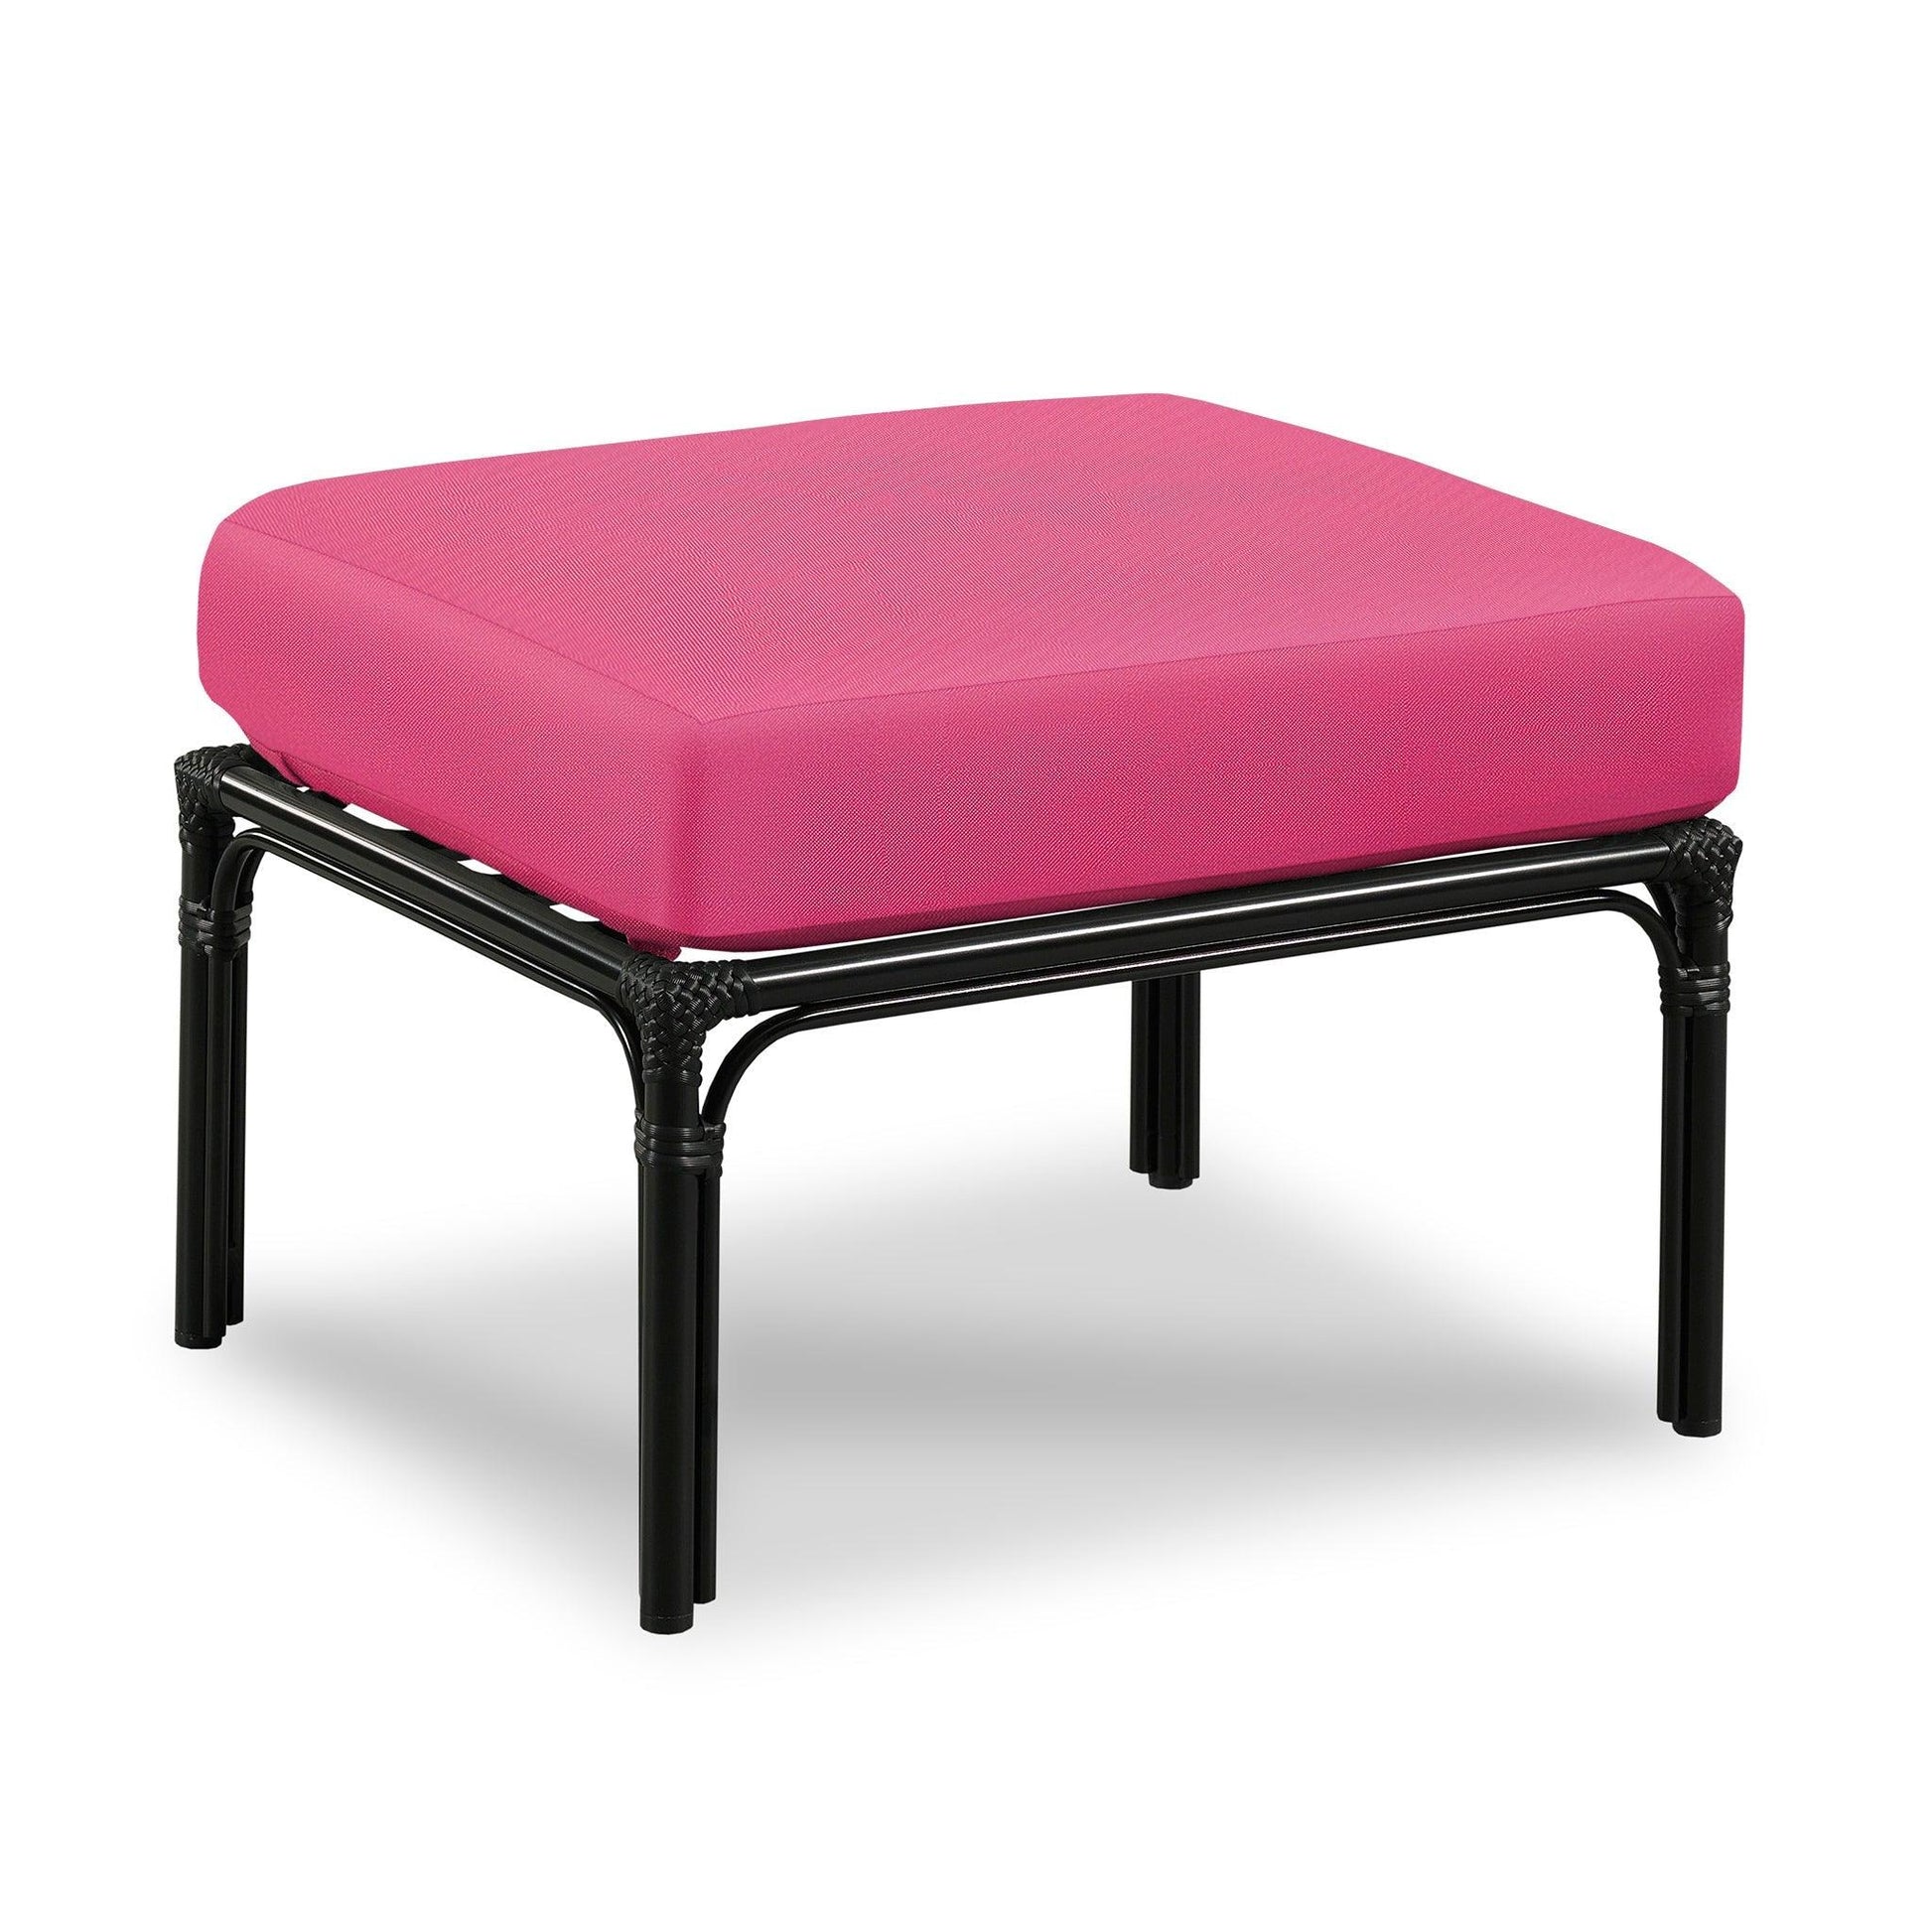 Carlyle Outdoor Ottoman - Fairley Fancy 